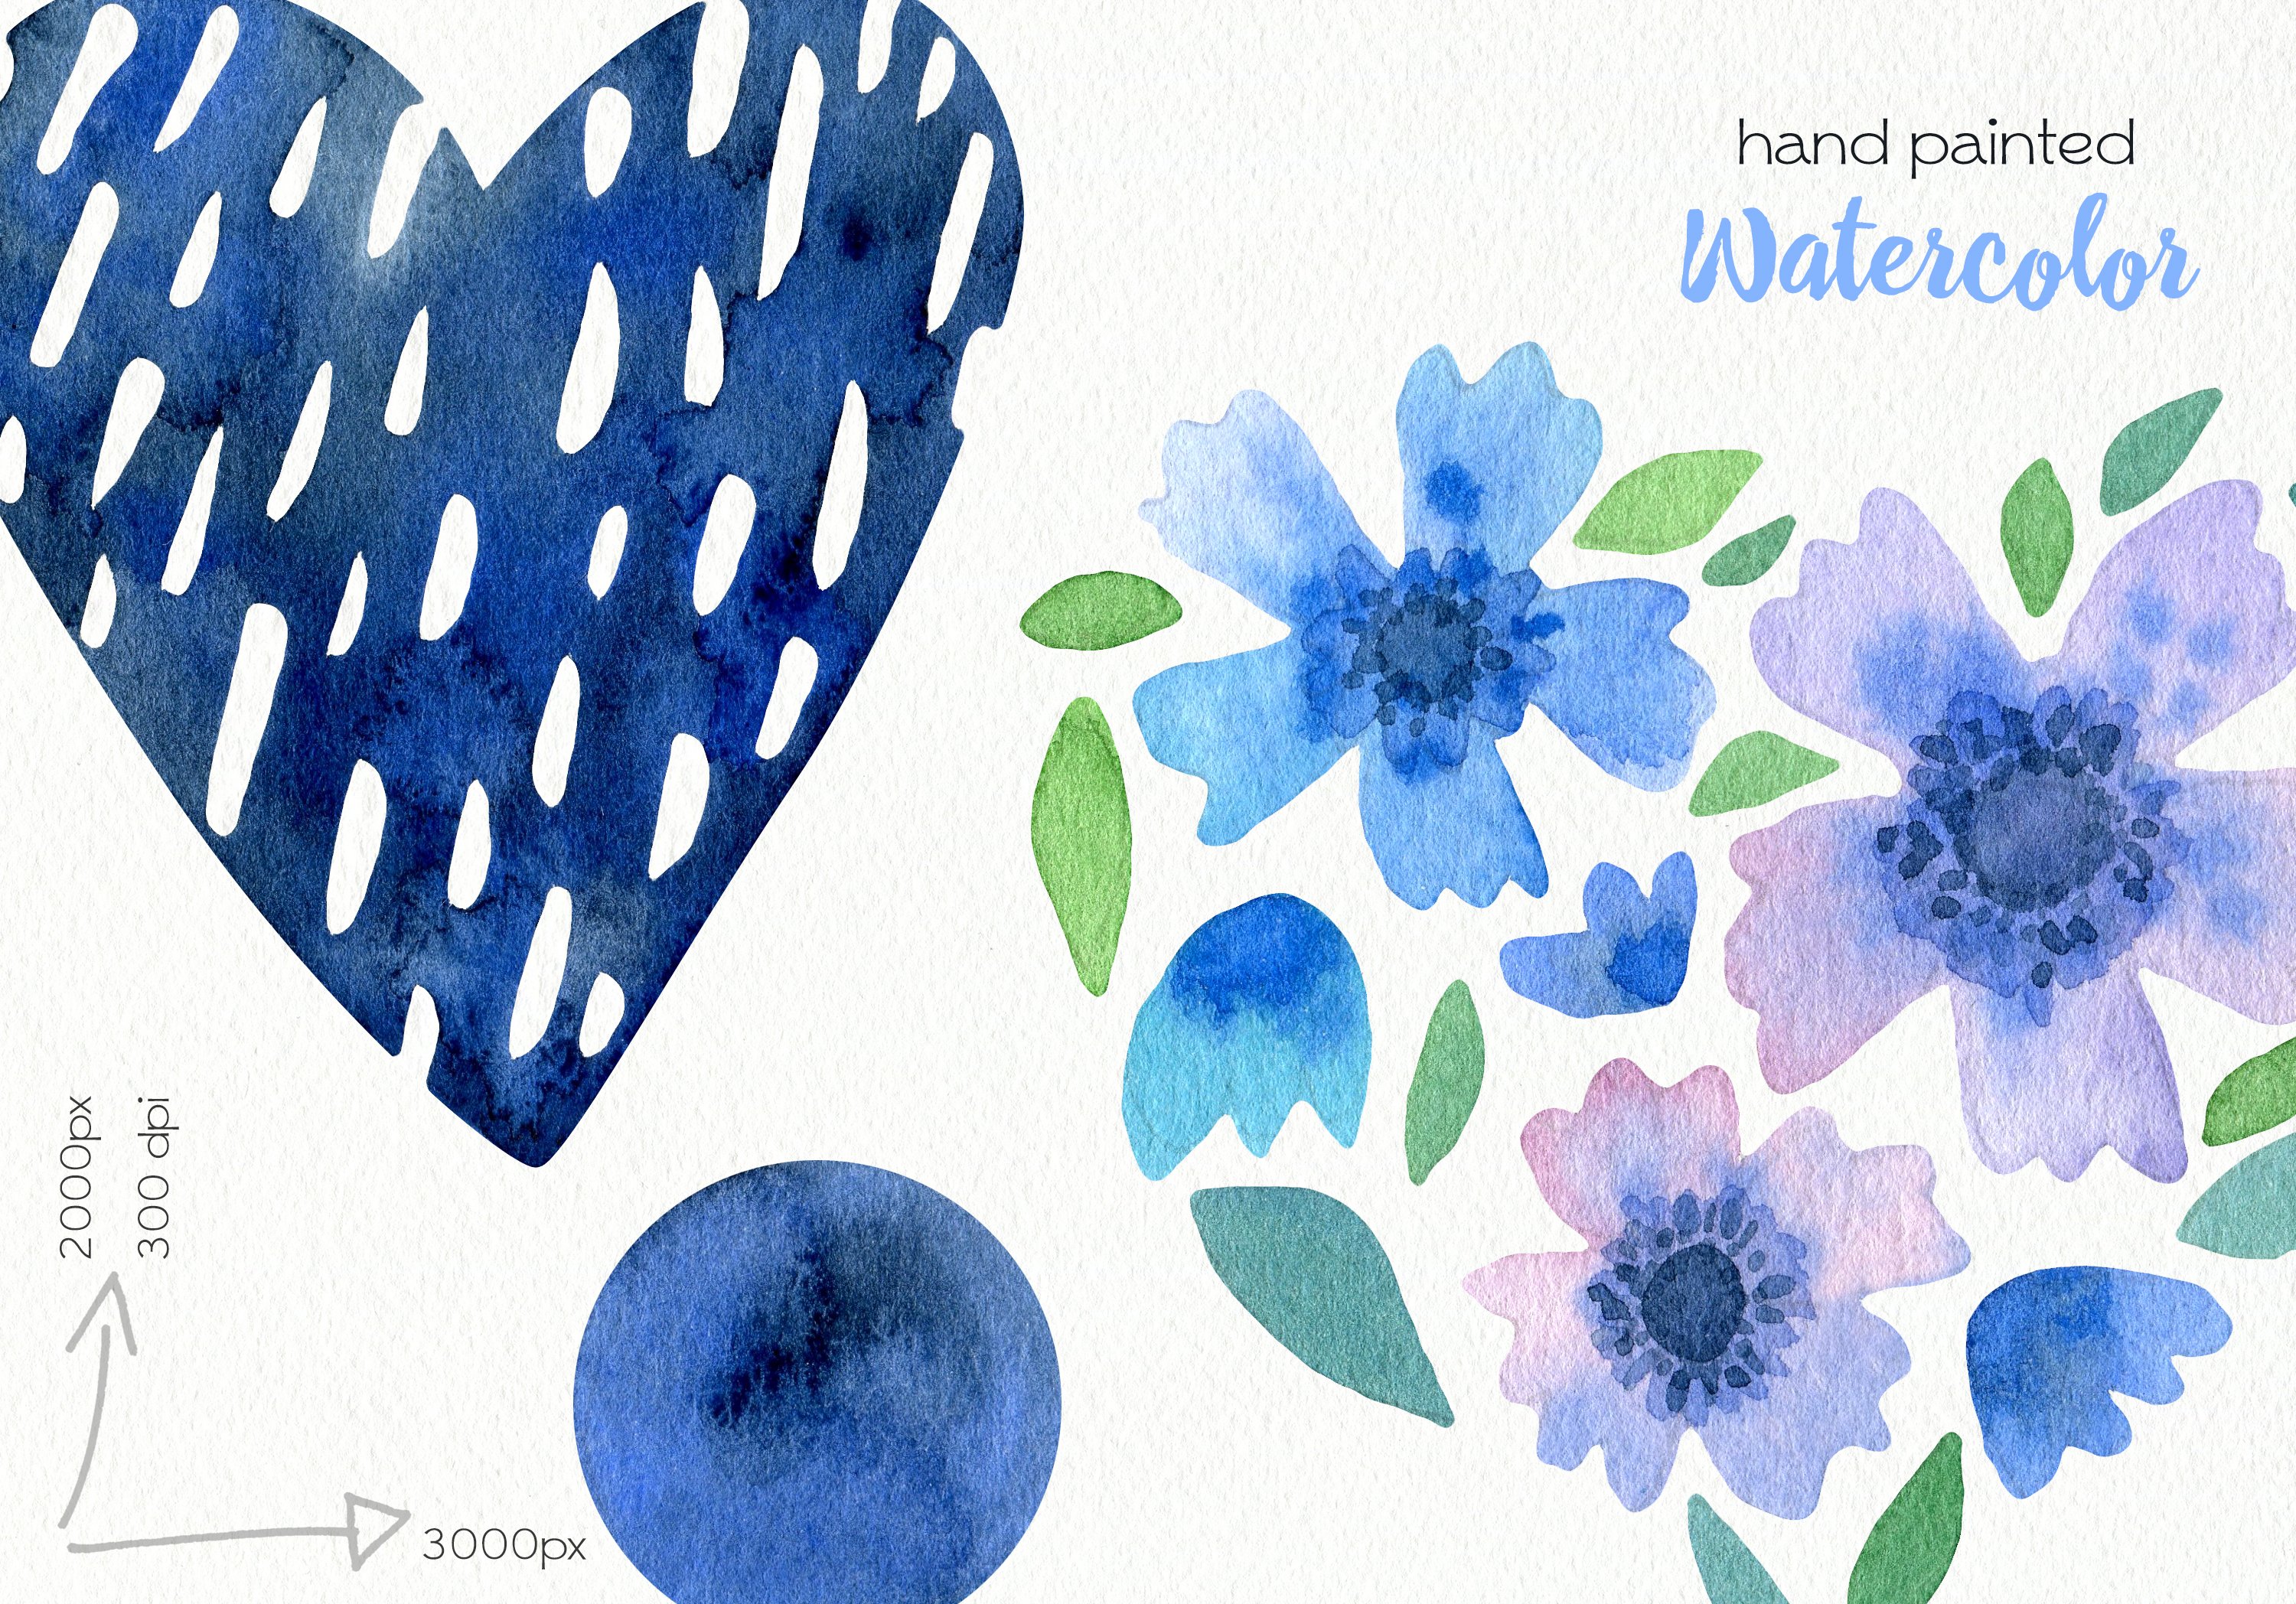 Blue heart and flowers in the same color.